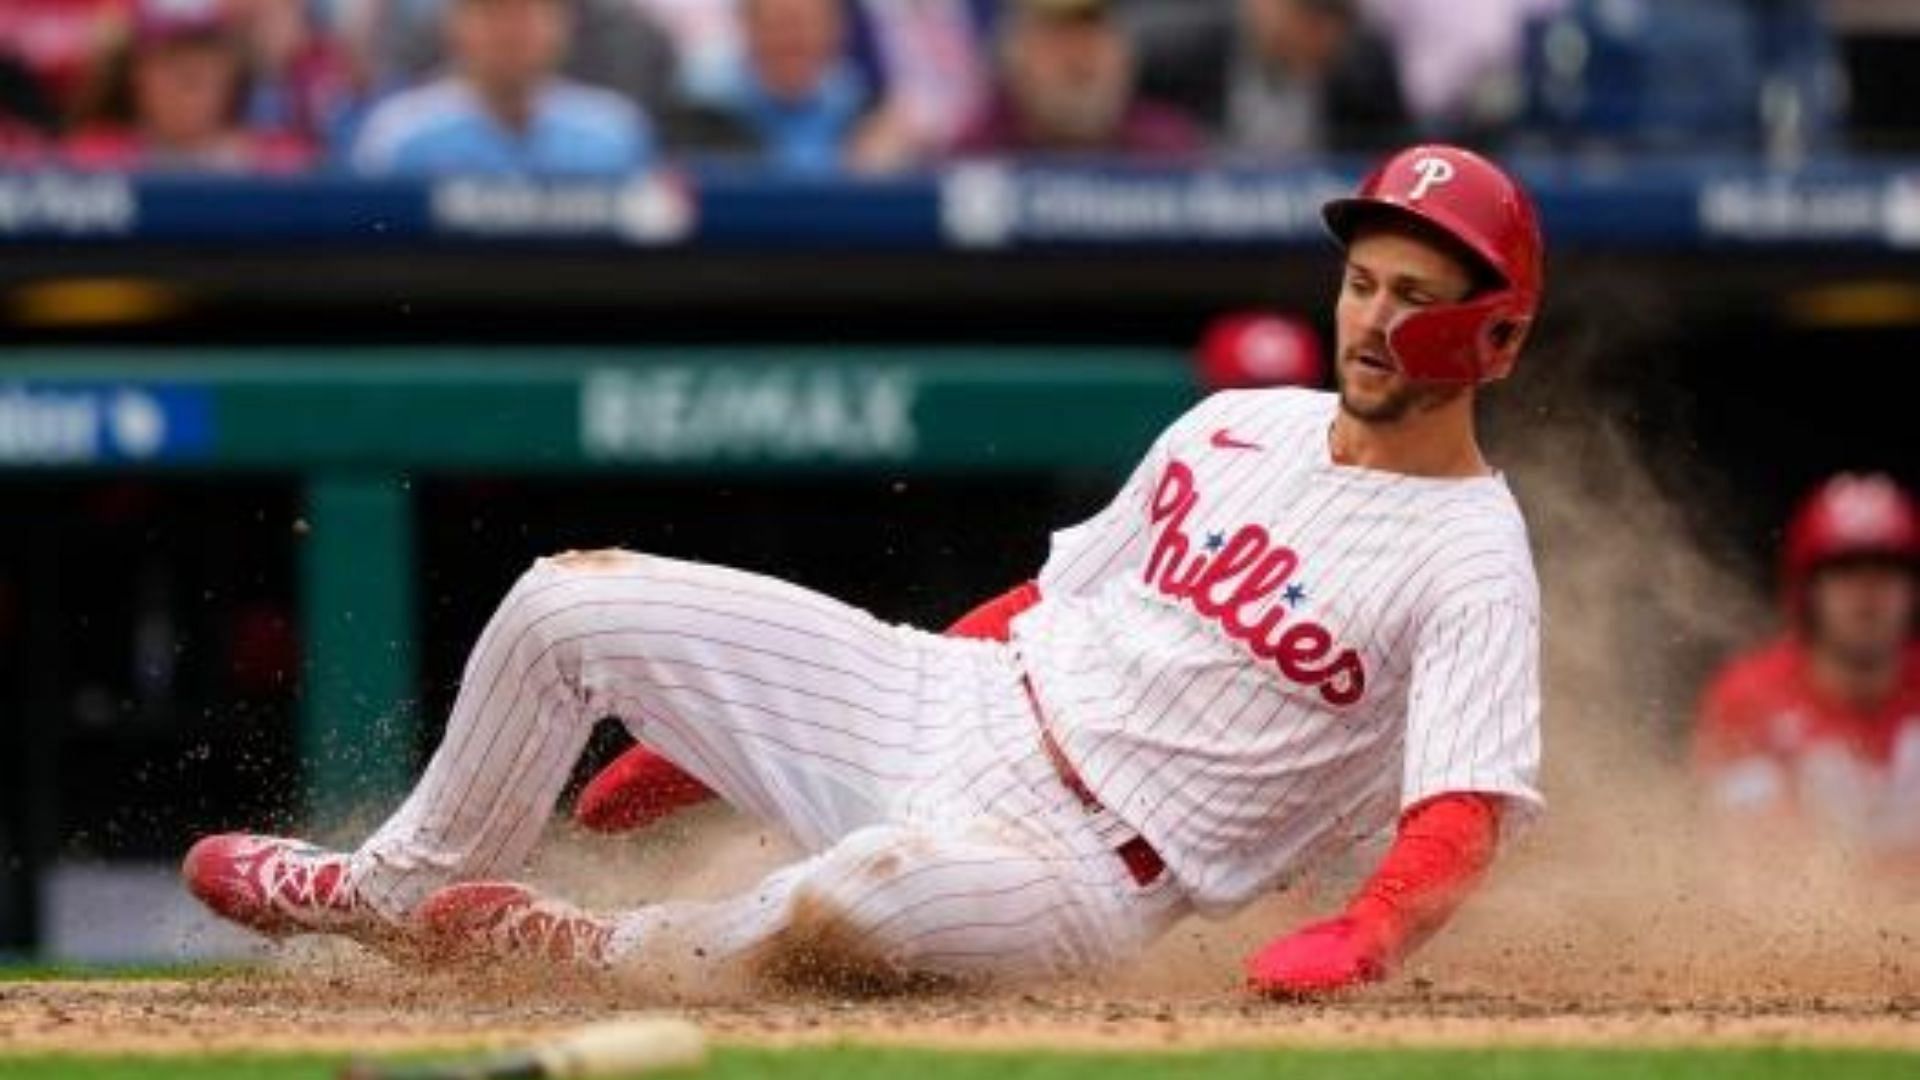 Trea turner in the Phillies vs d-backs&#039; Thrilling Game&quot;